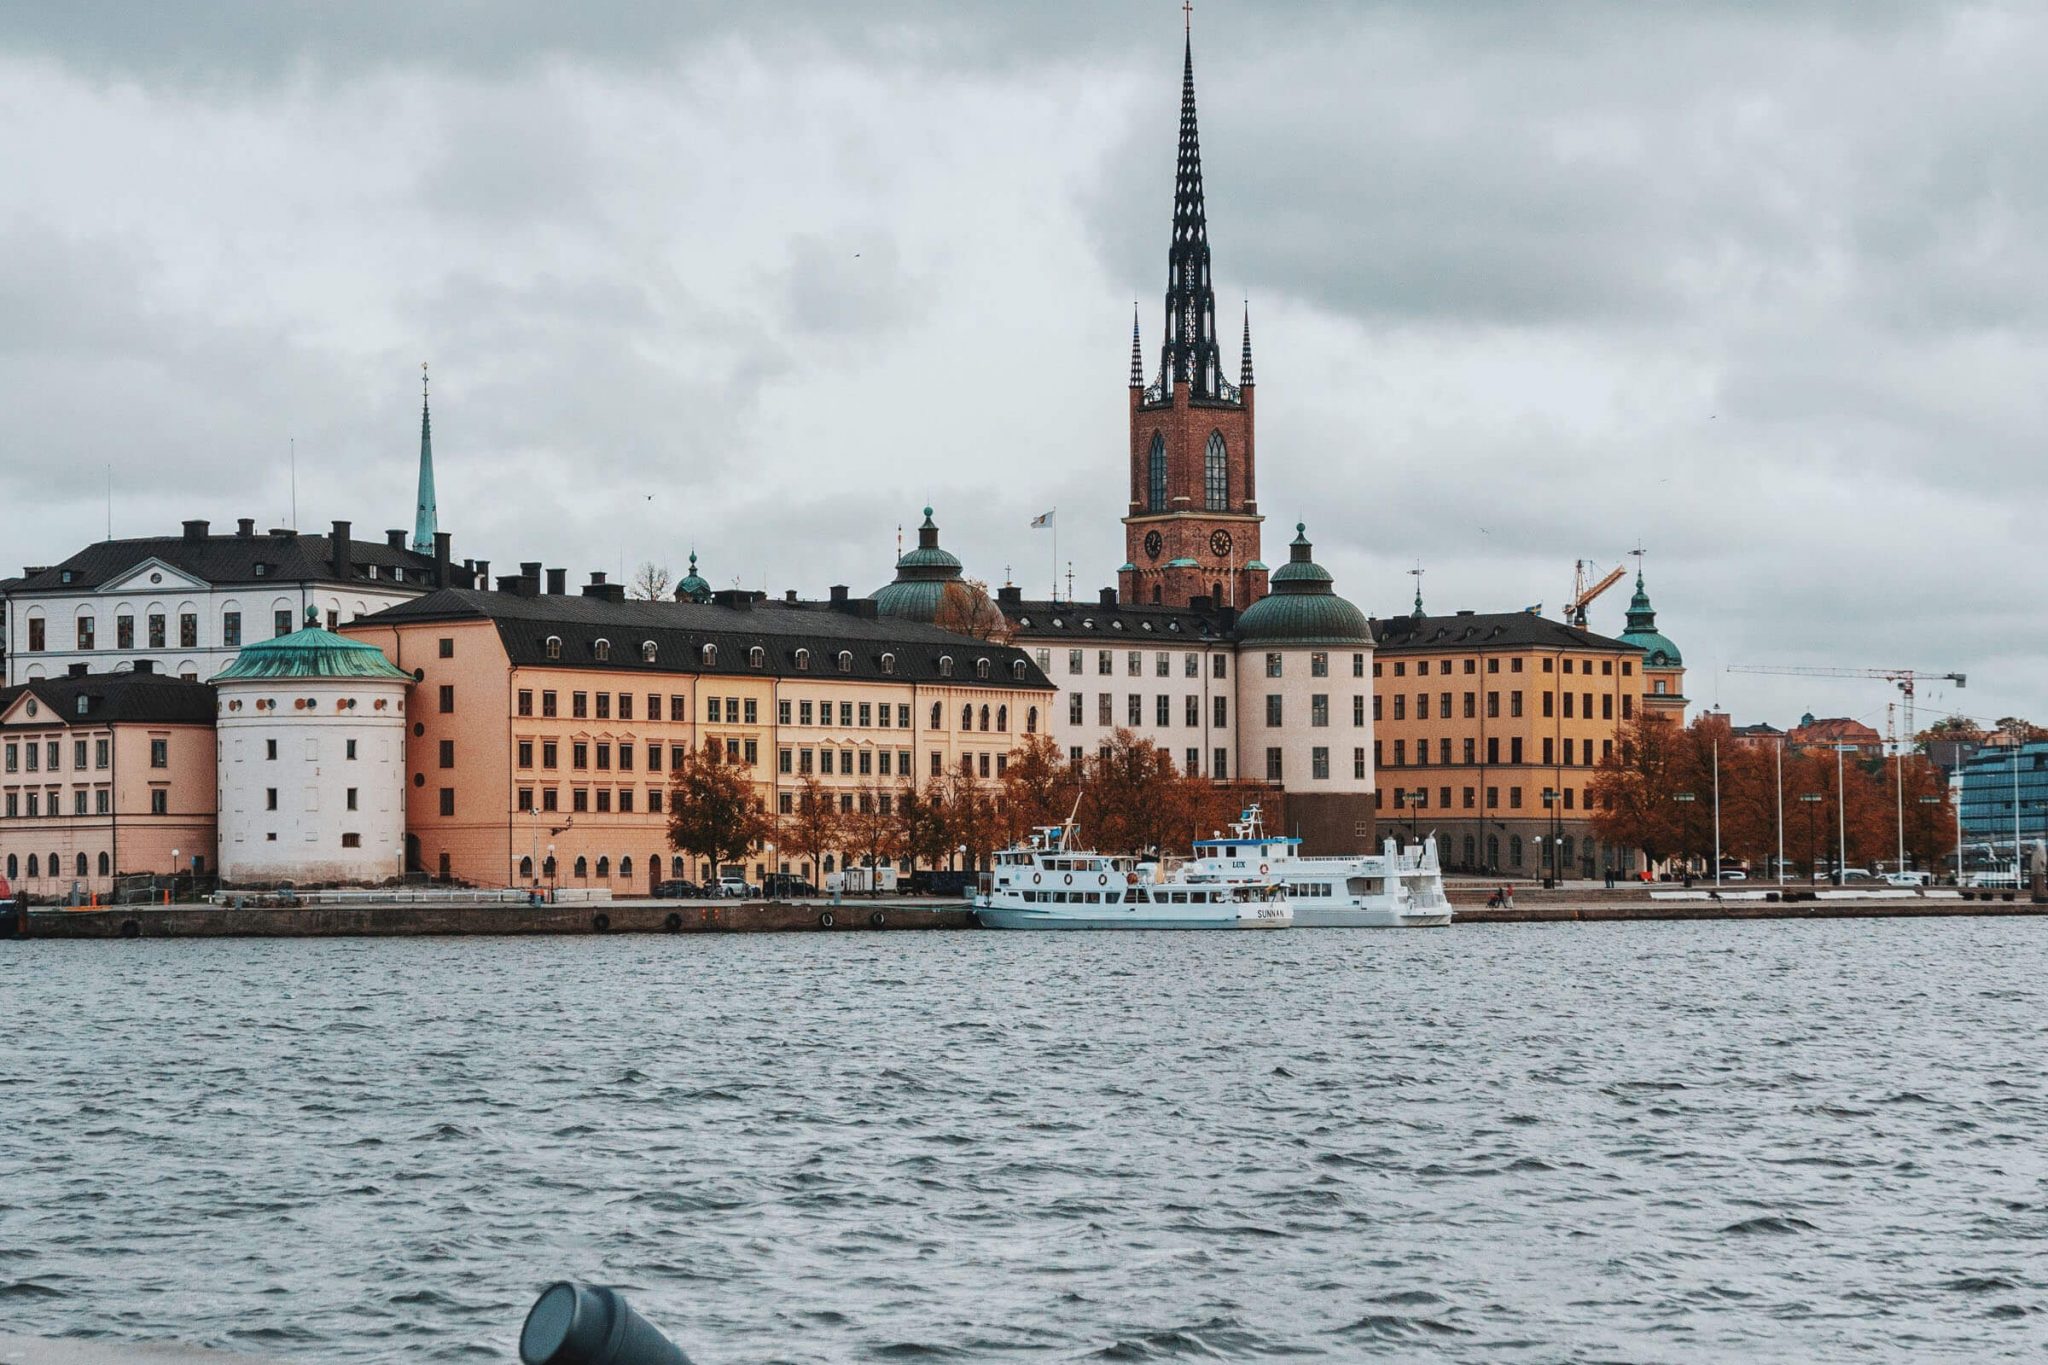 Stockholm Classic Budget Hotell